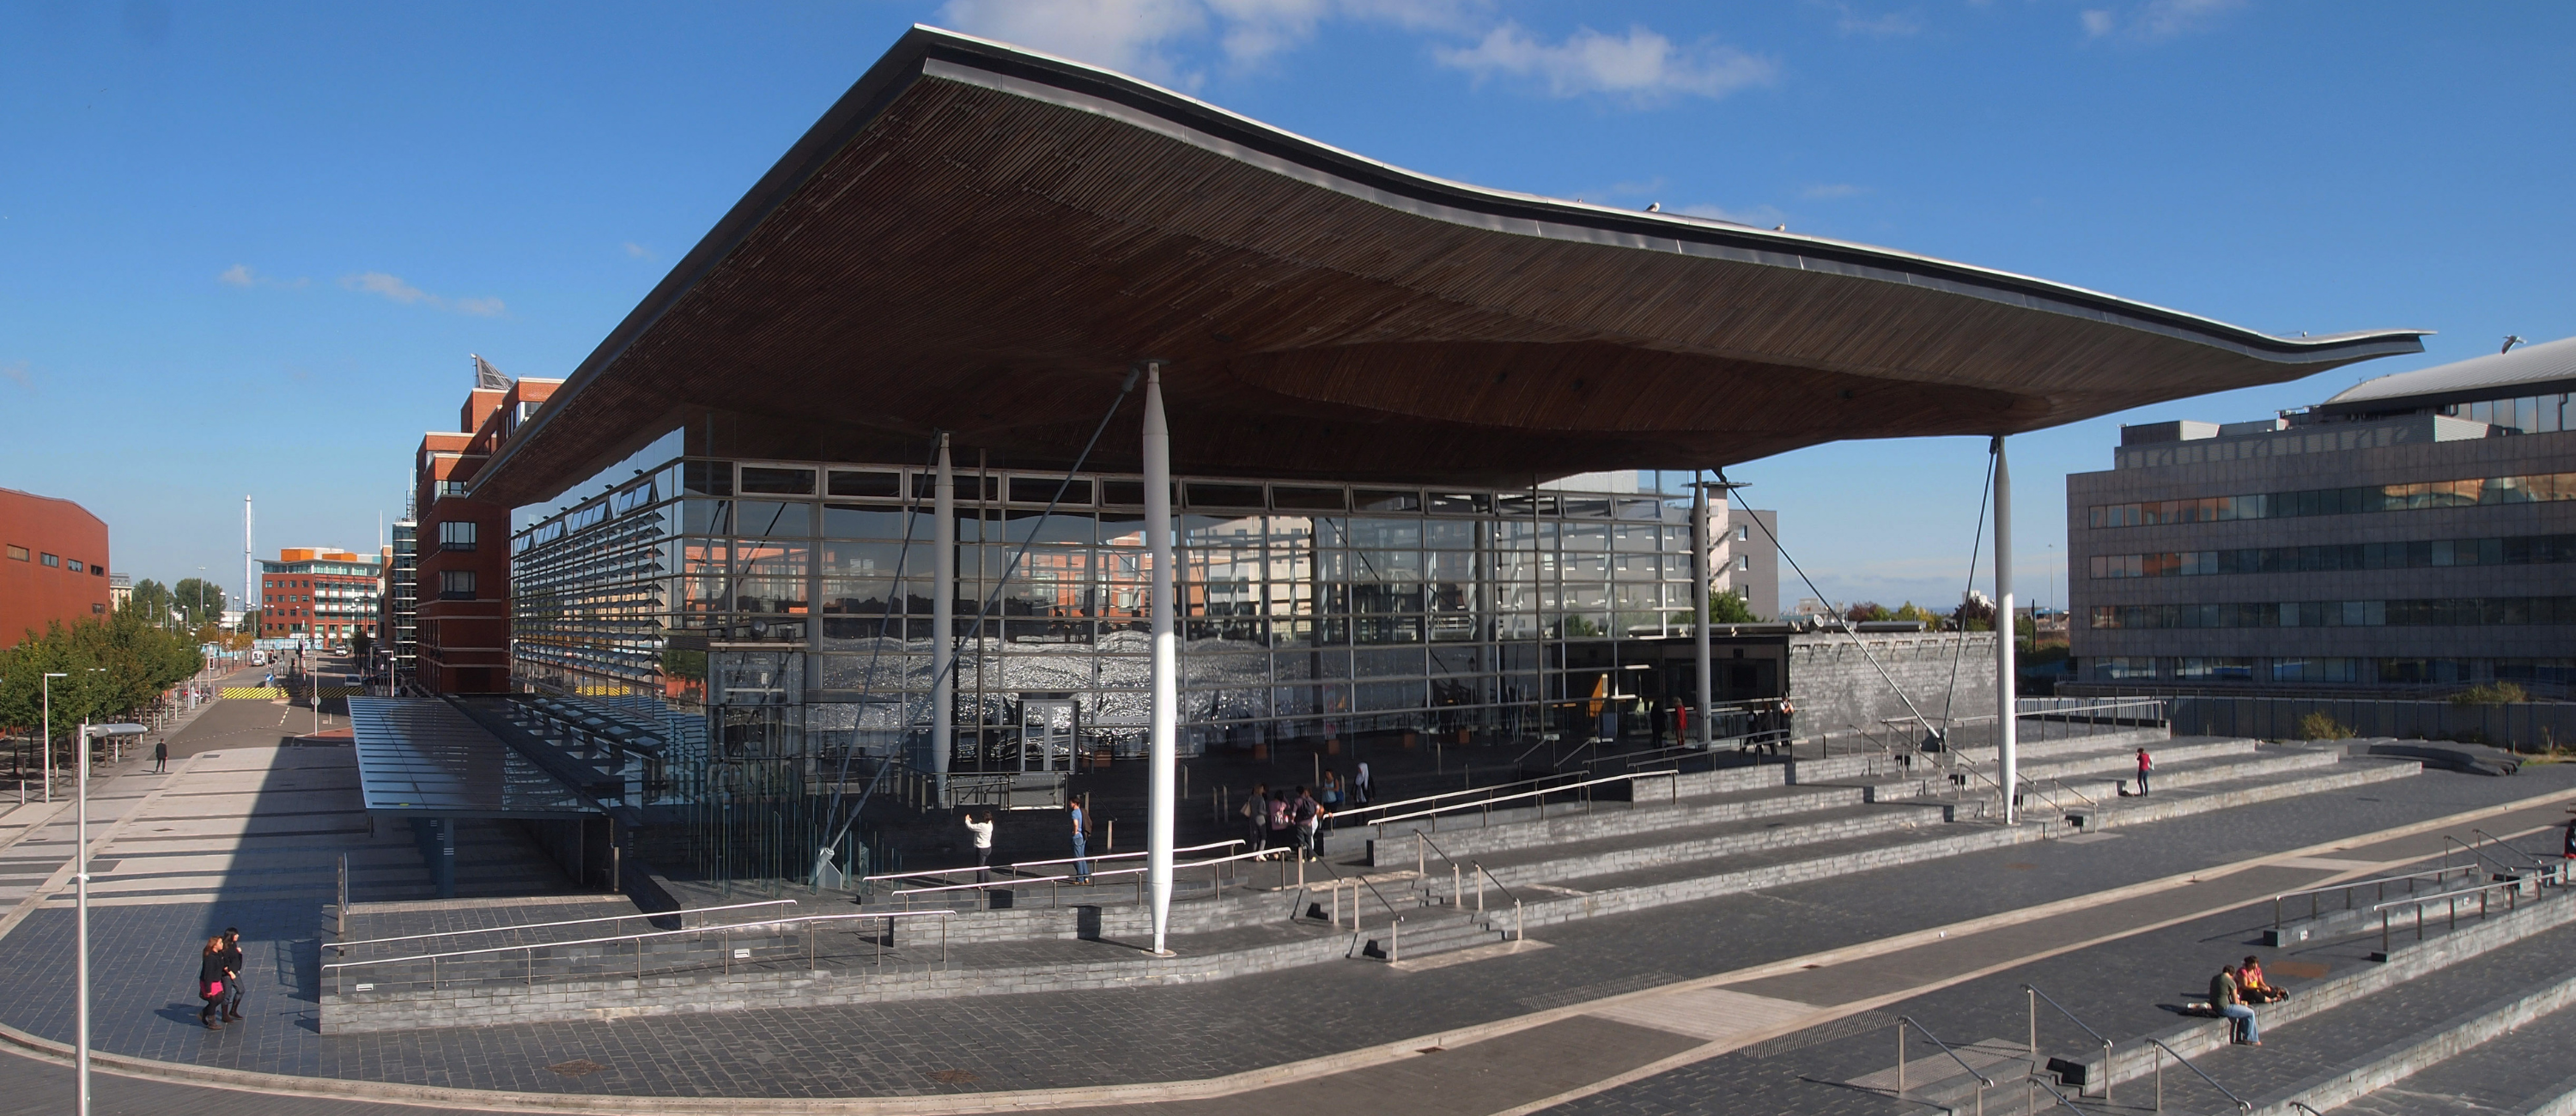 The front of the Senedd